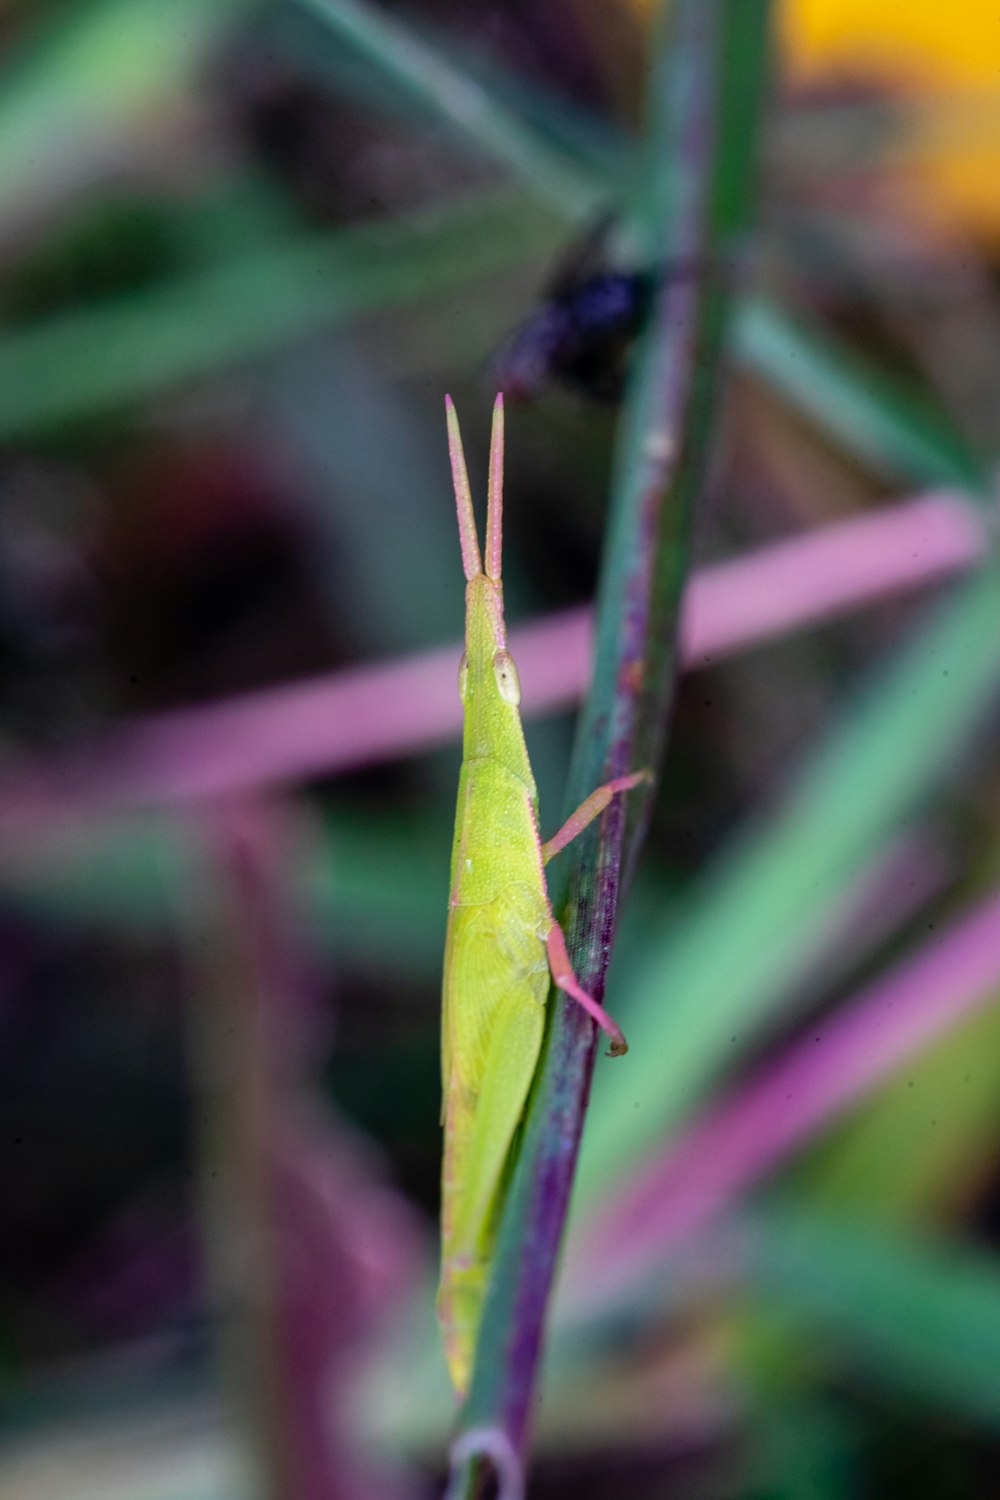 green grasshopper on green leaf in close up photography during daytime